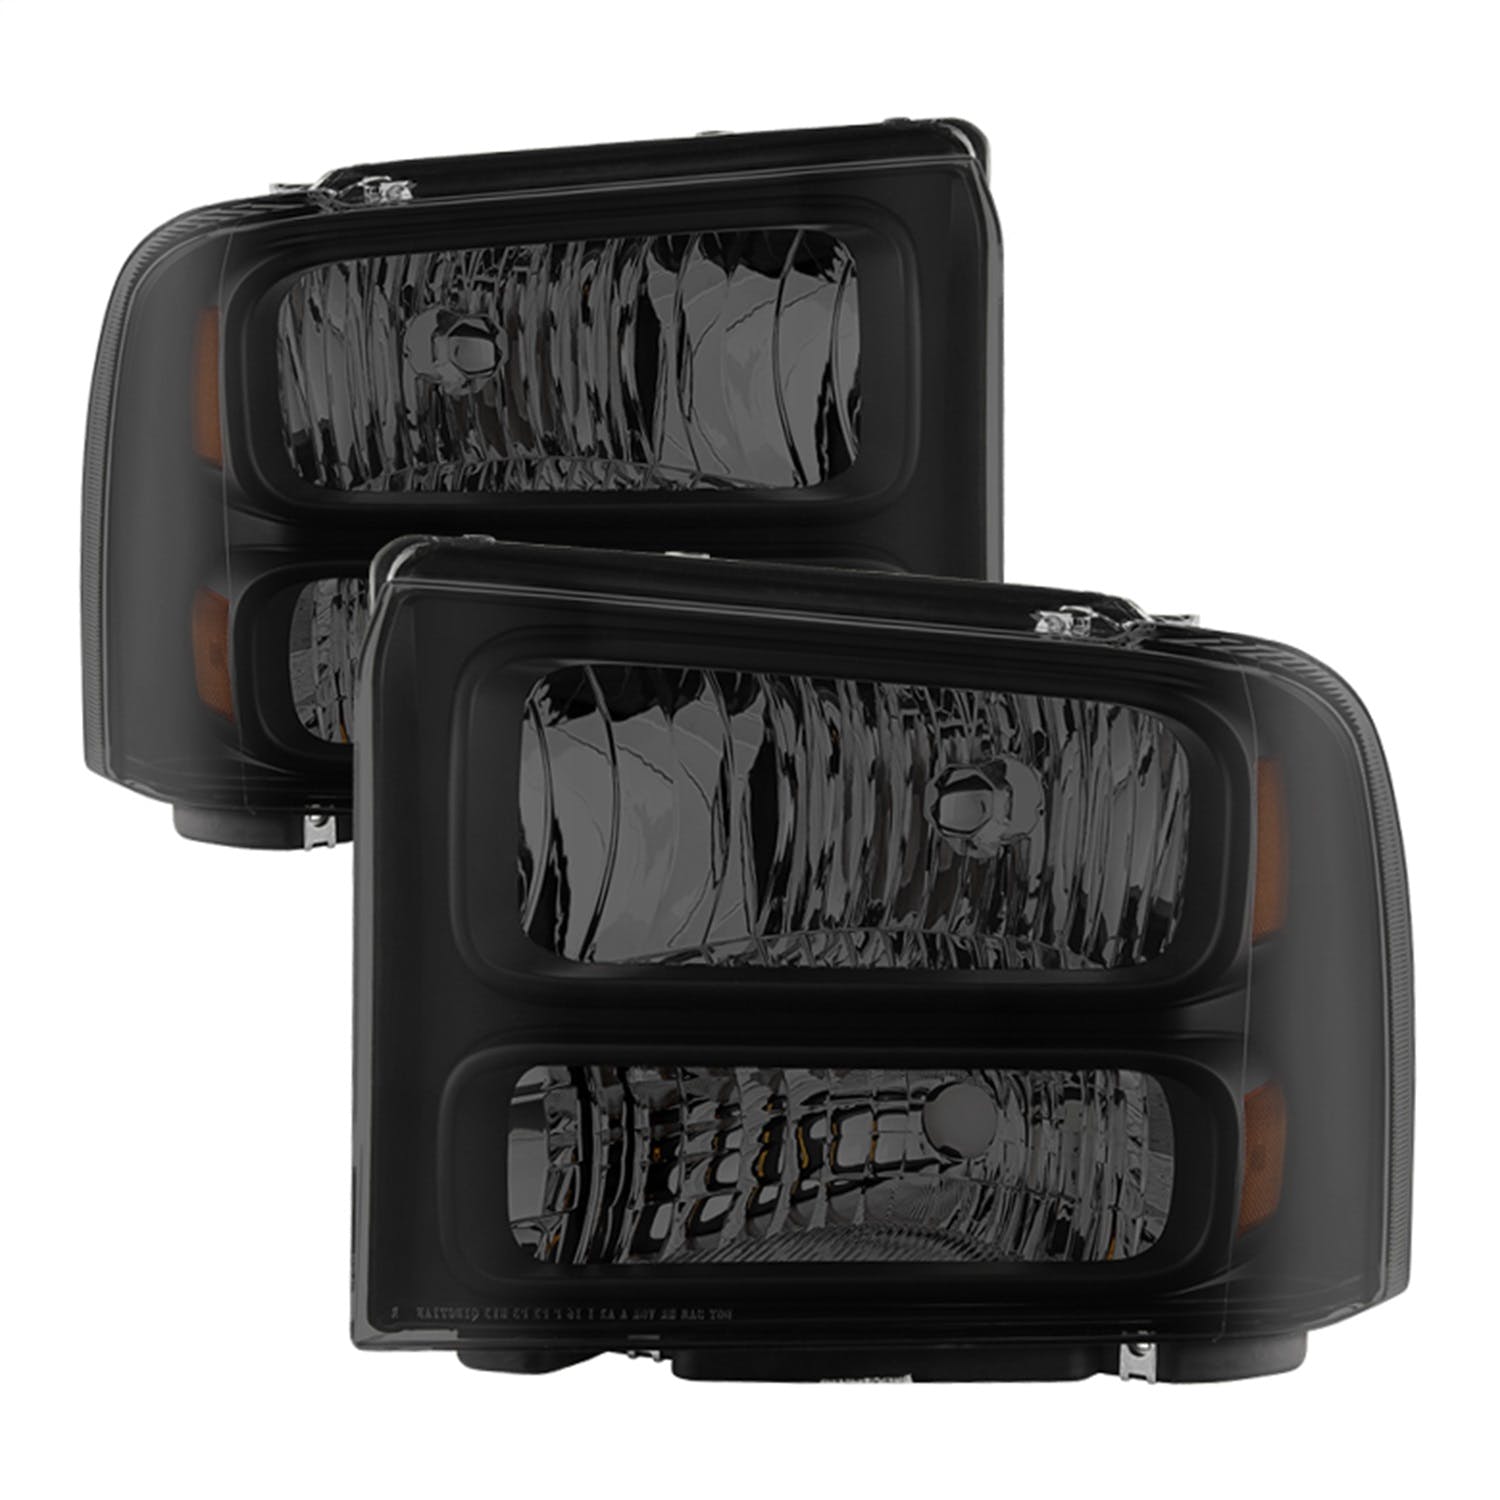 XTUNE POWER 9033001 Ford F250 F350 F450 Superduty Excursion 99 04 Headlights (05 07 Harley Style Convert to 99 04 Come with Bulbs Wiring Harness and Instruction) Black Smoked